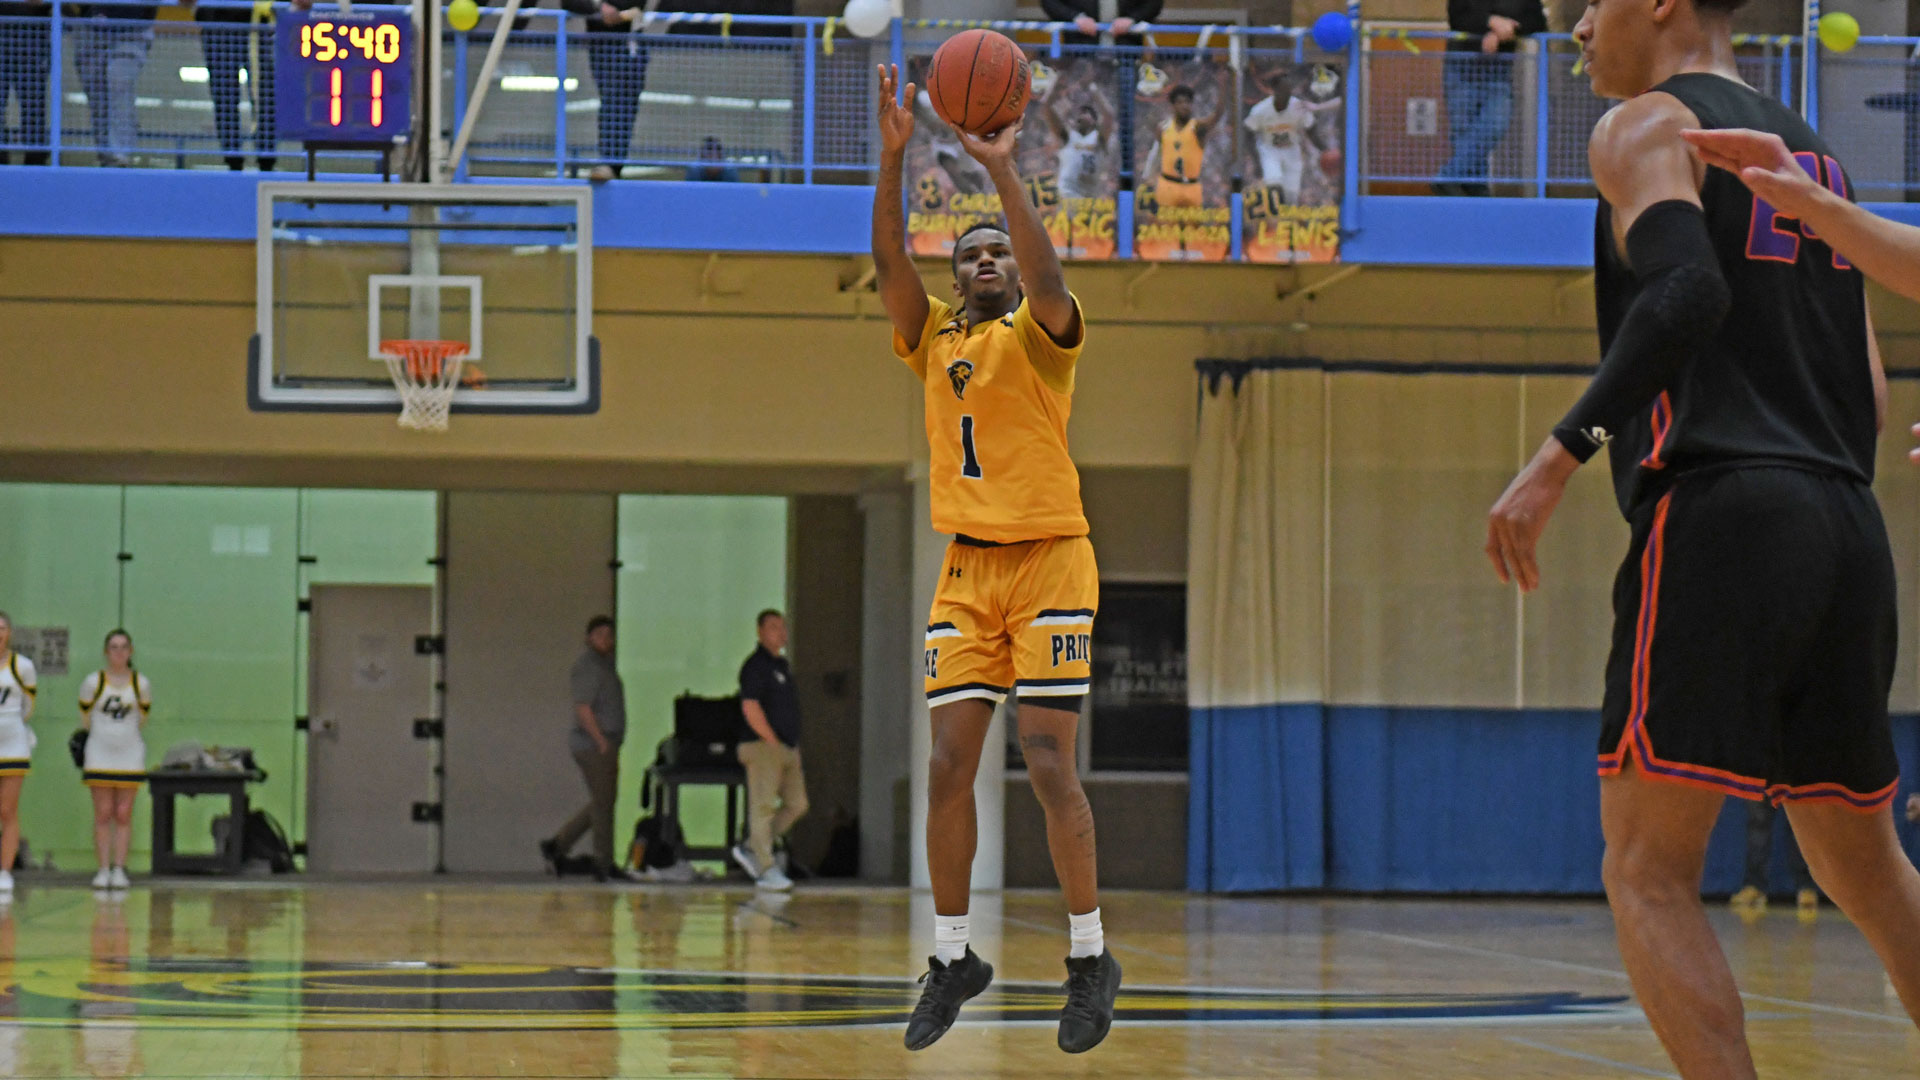 Pride fall behind late in 93-83 loss at William Penn